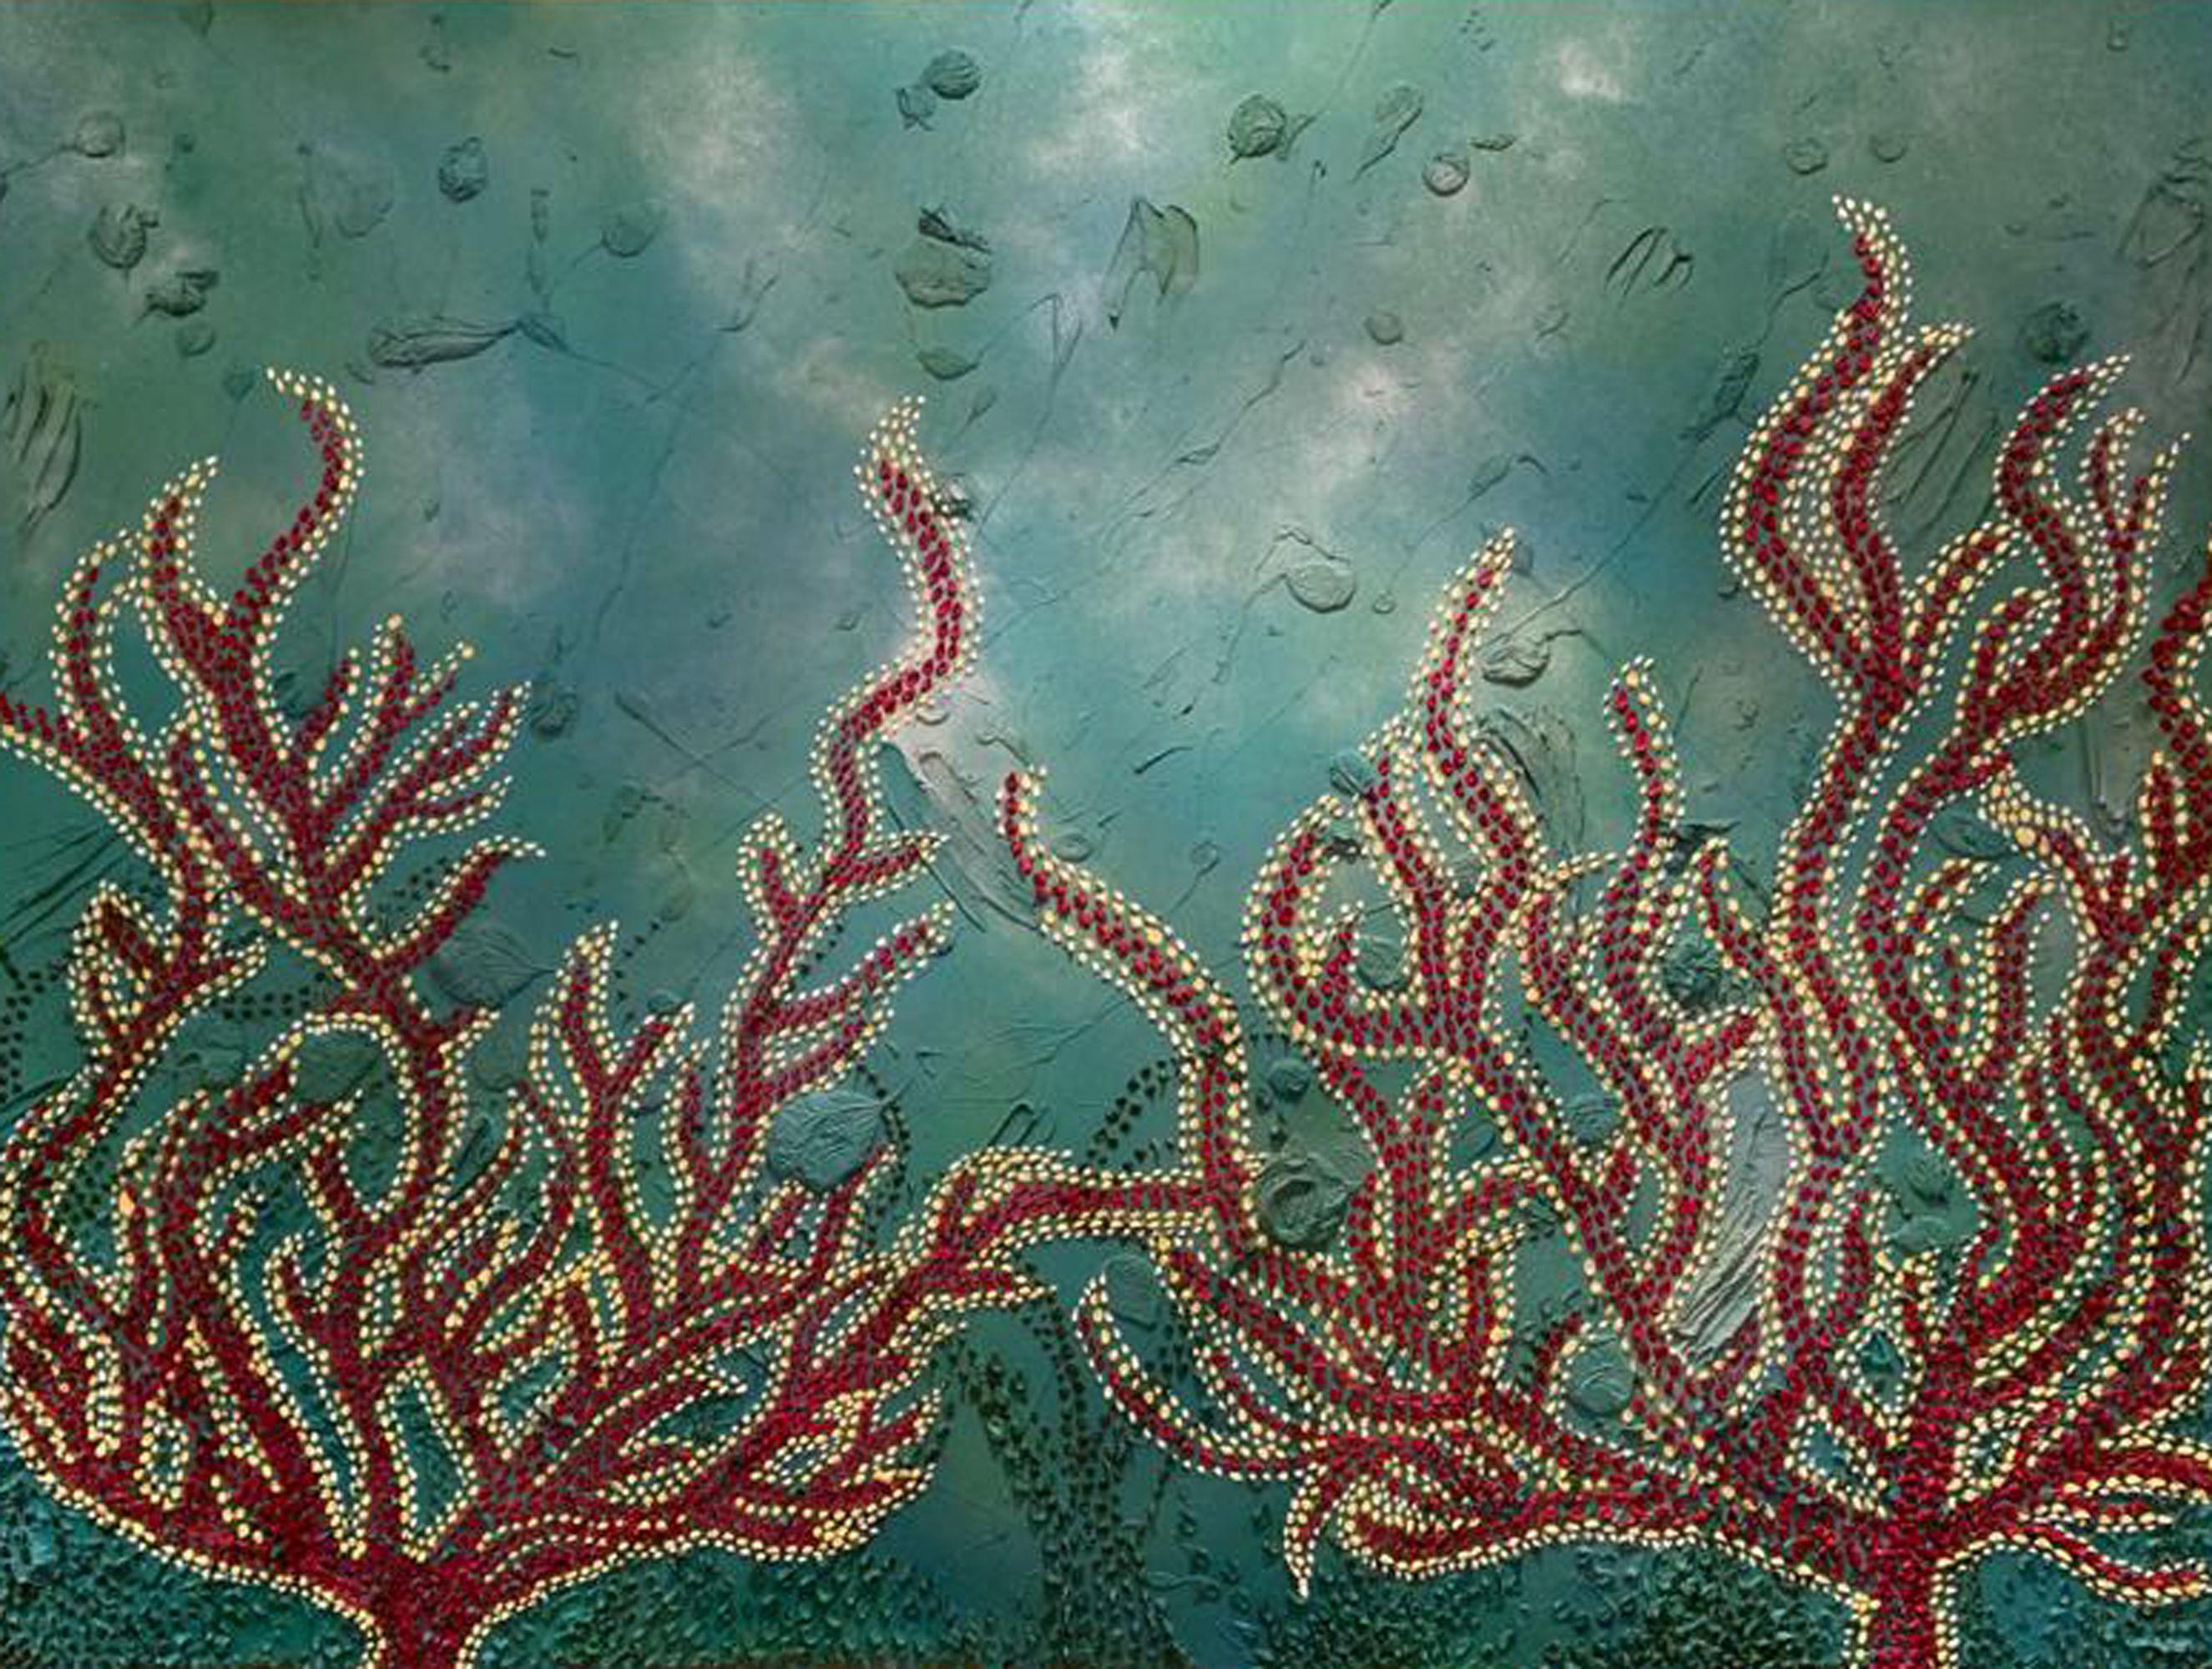 Alexandra Romano Abstract Painting - Under the Sea, Painting, Oil on Canvas